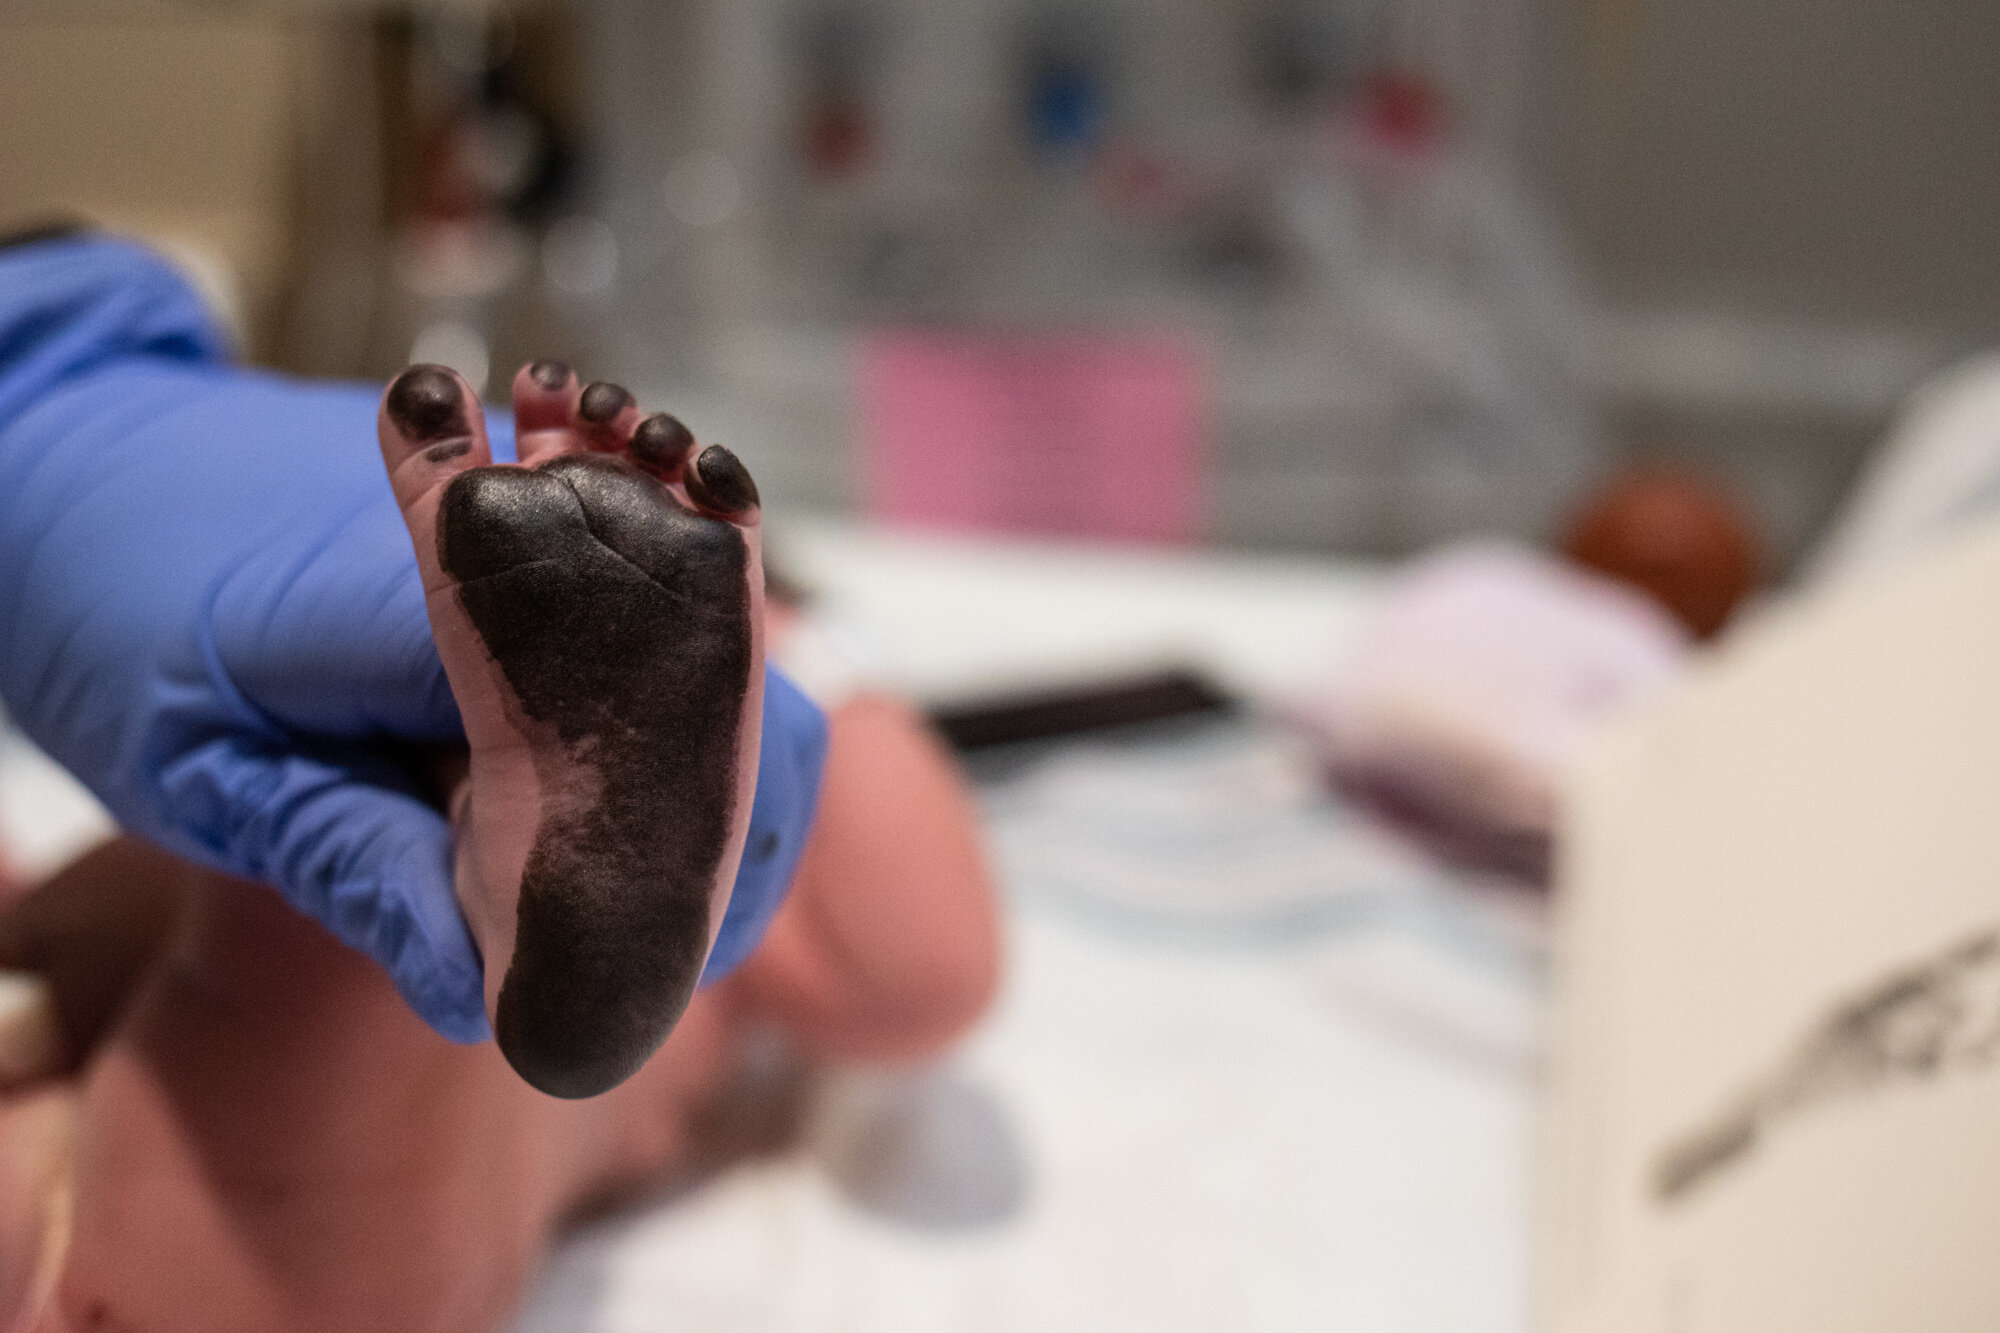 newborn baby foot covered in ink